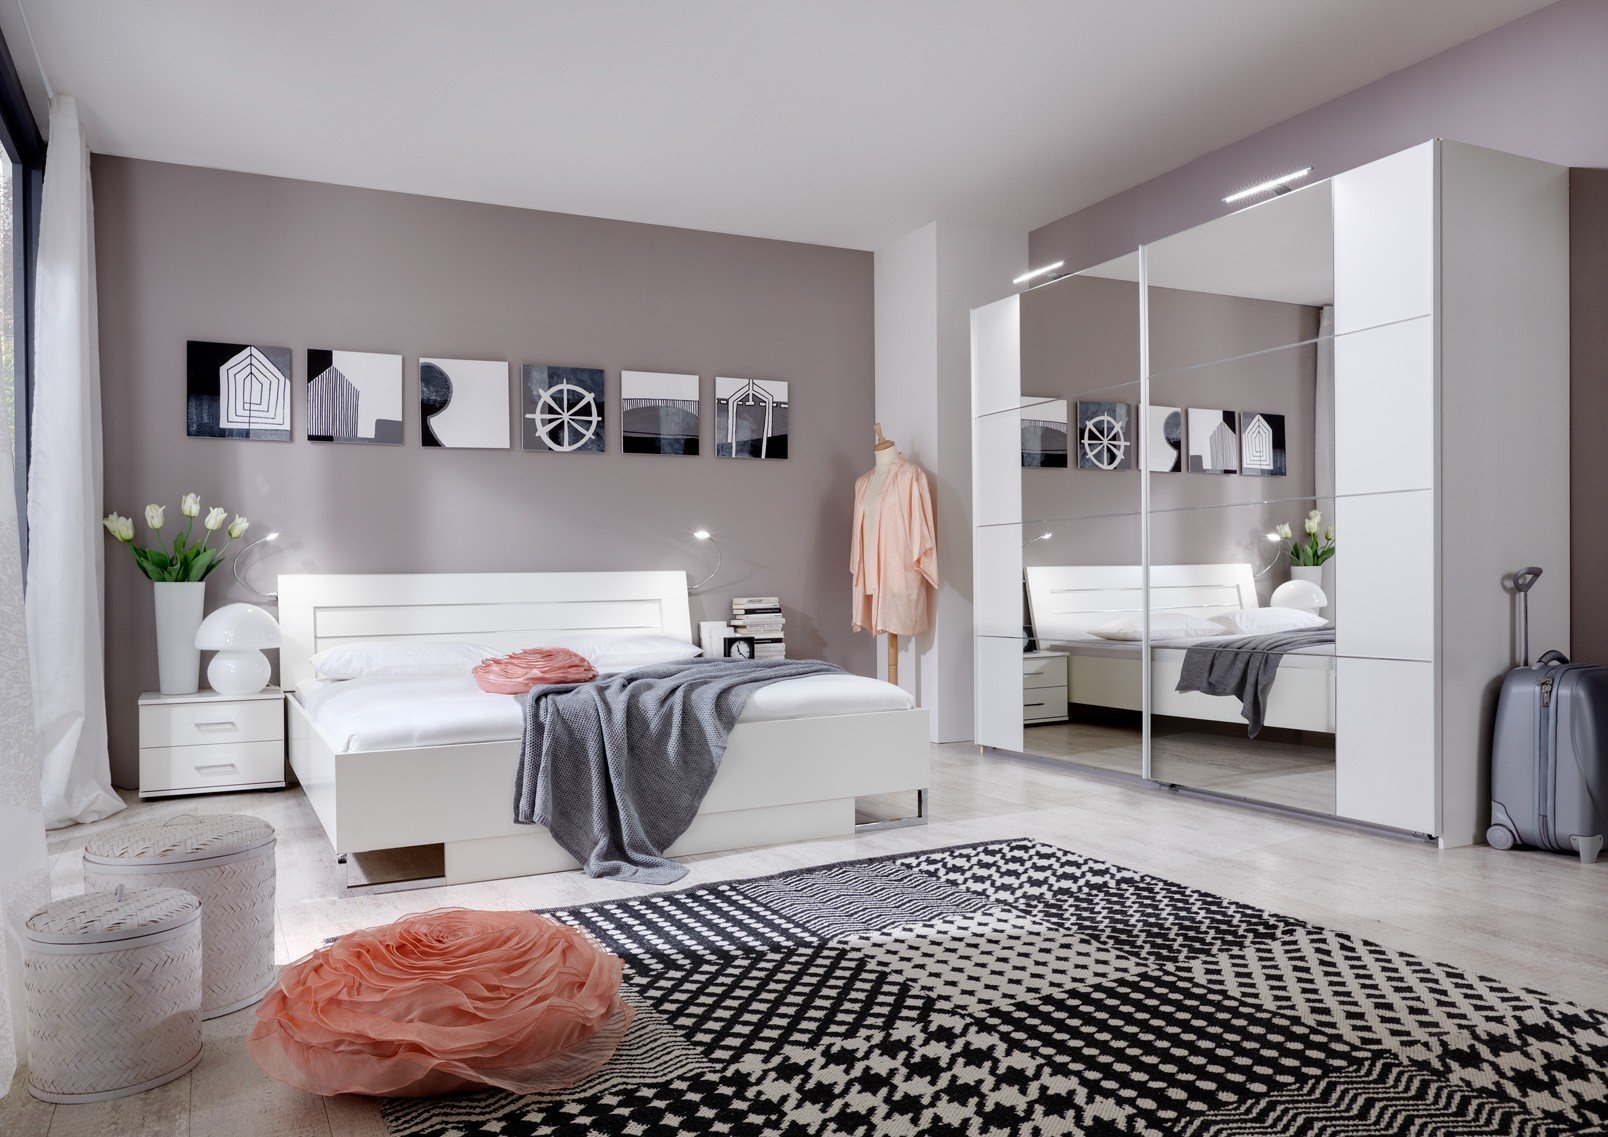 design of the wardrobe in the bedroom photo ideas